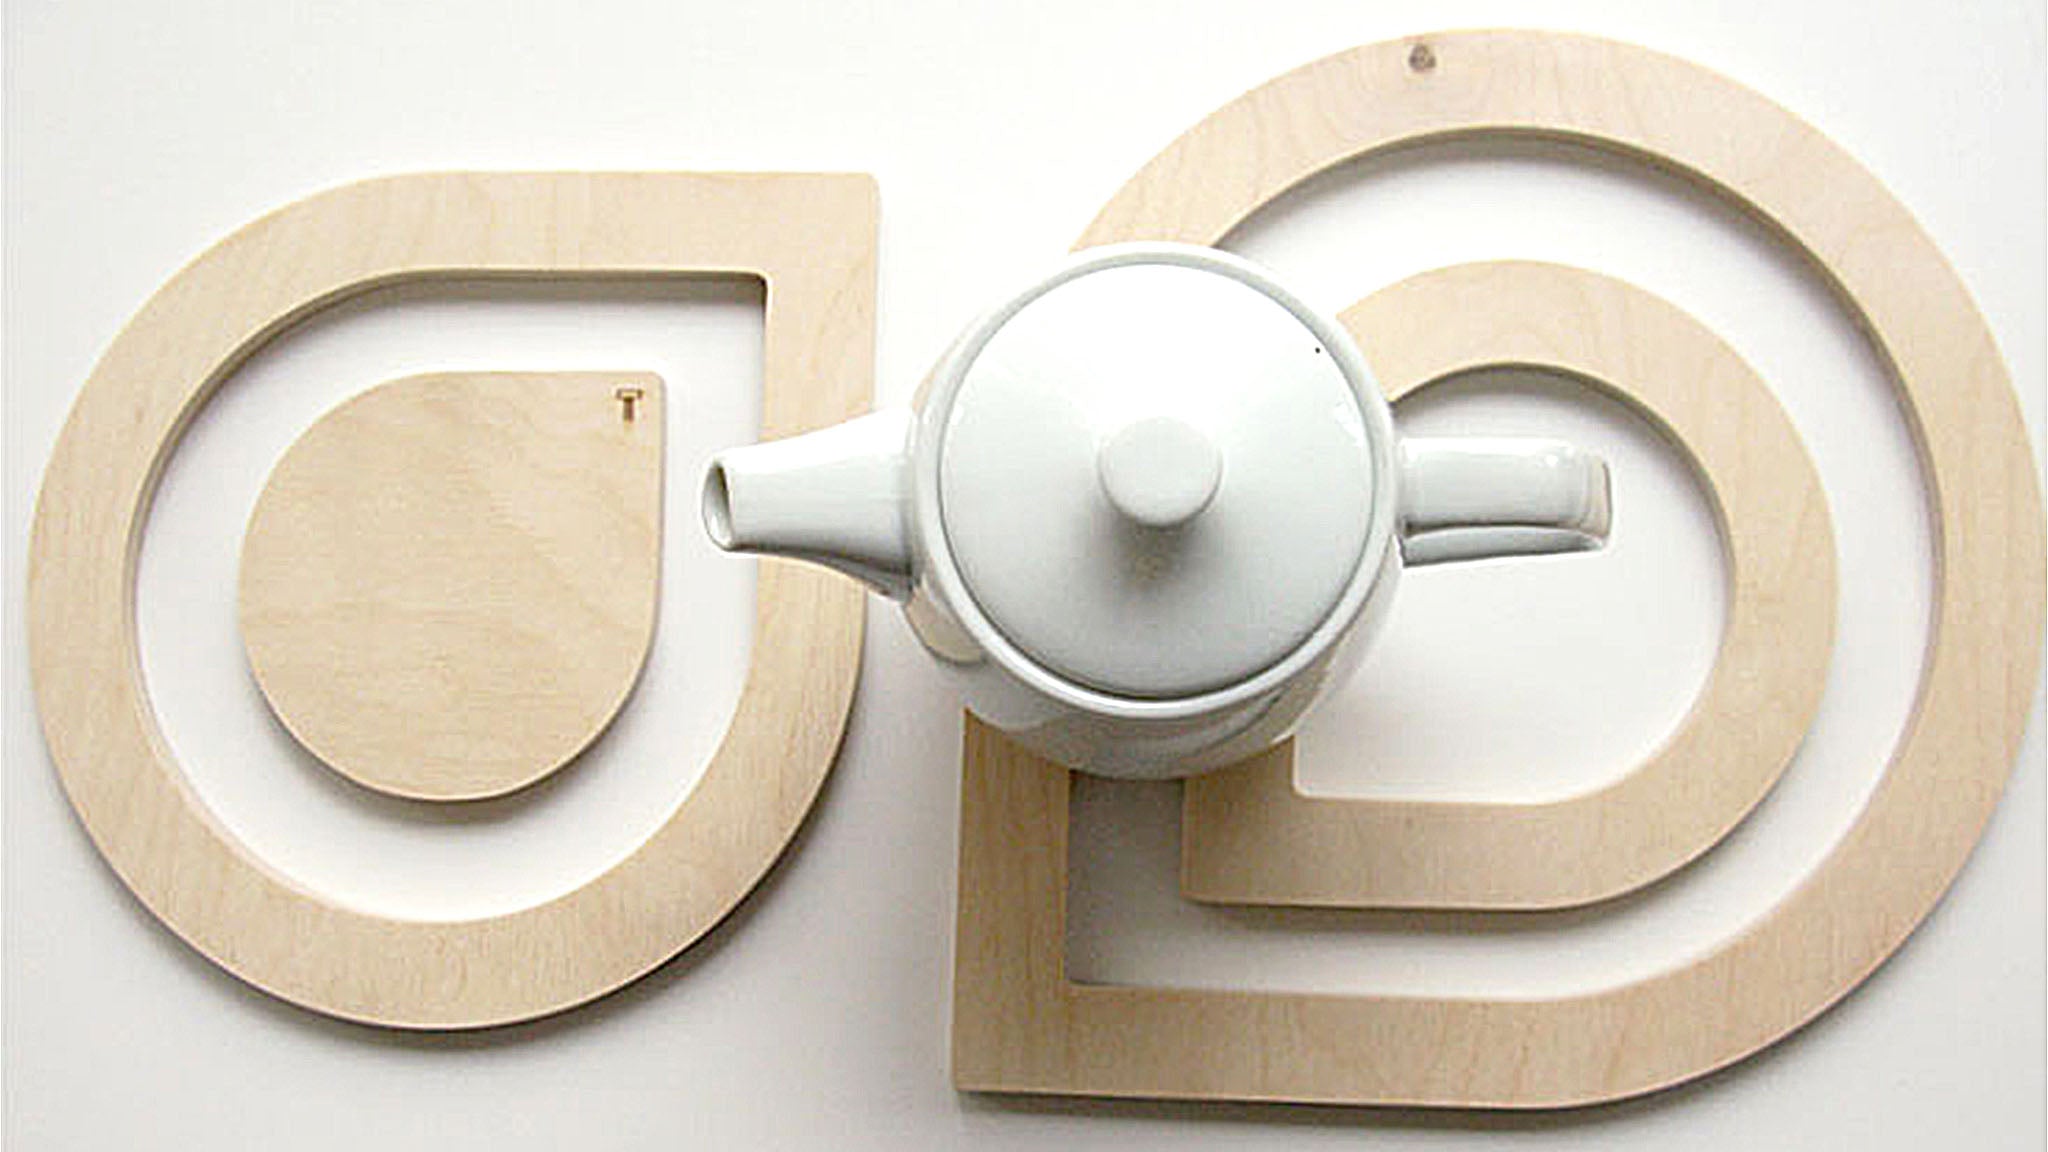 TOMA Objects Waterdrops wood trivet set by Anne Thomas